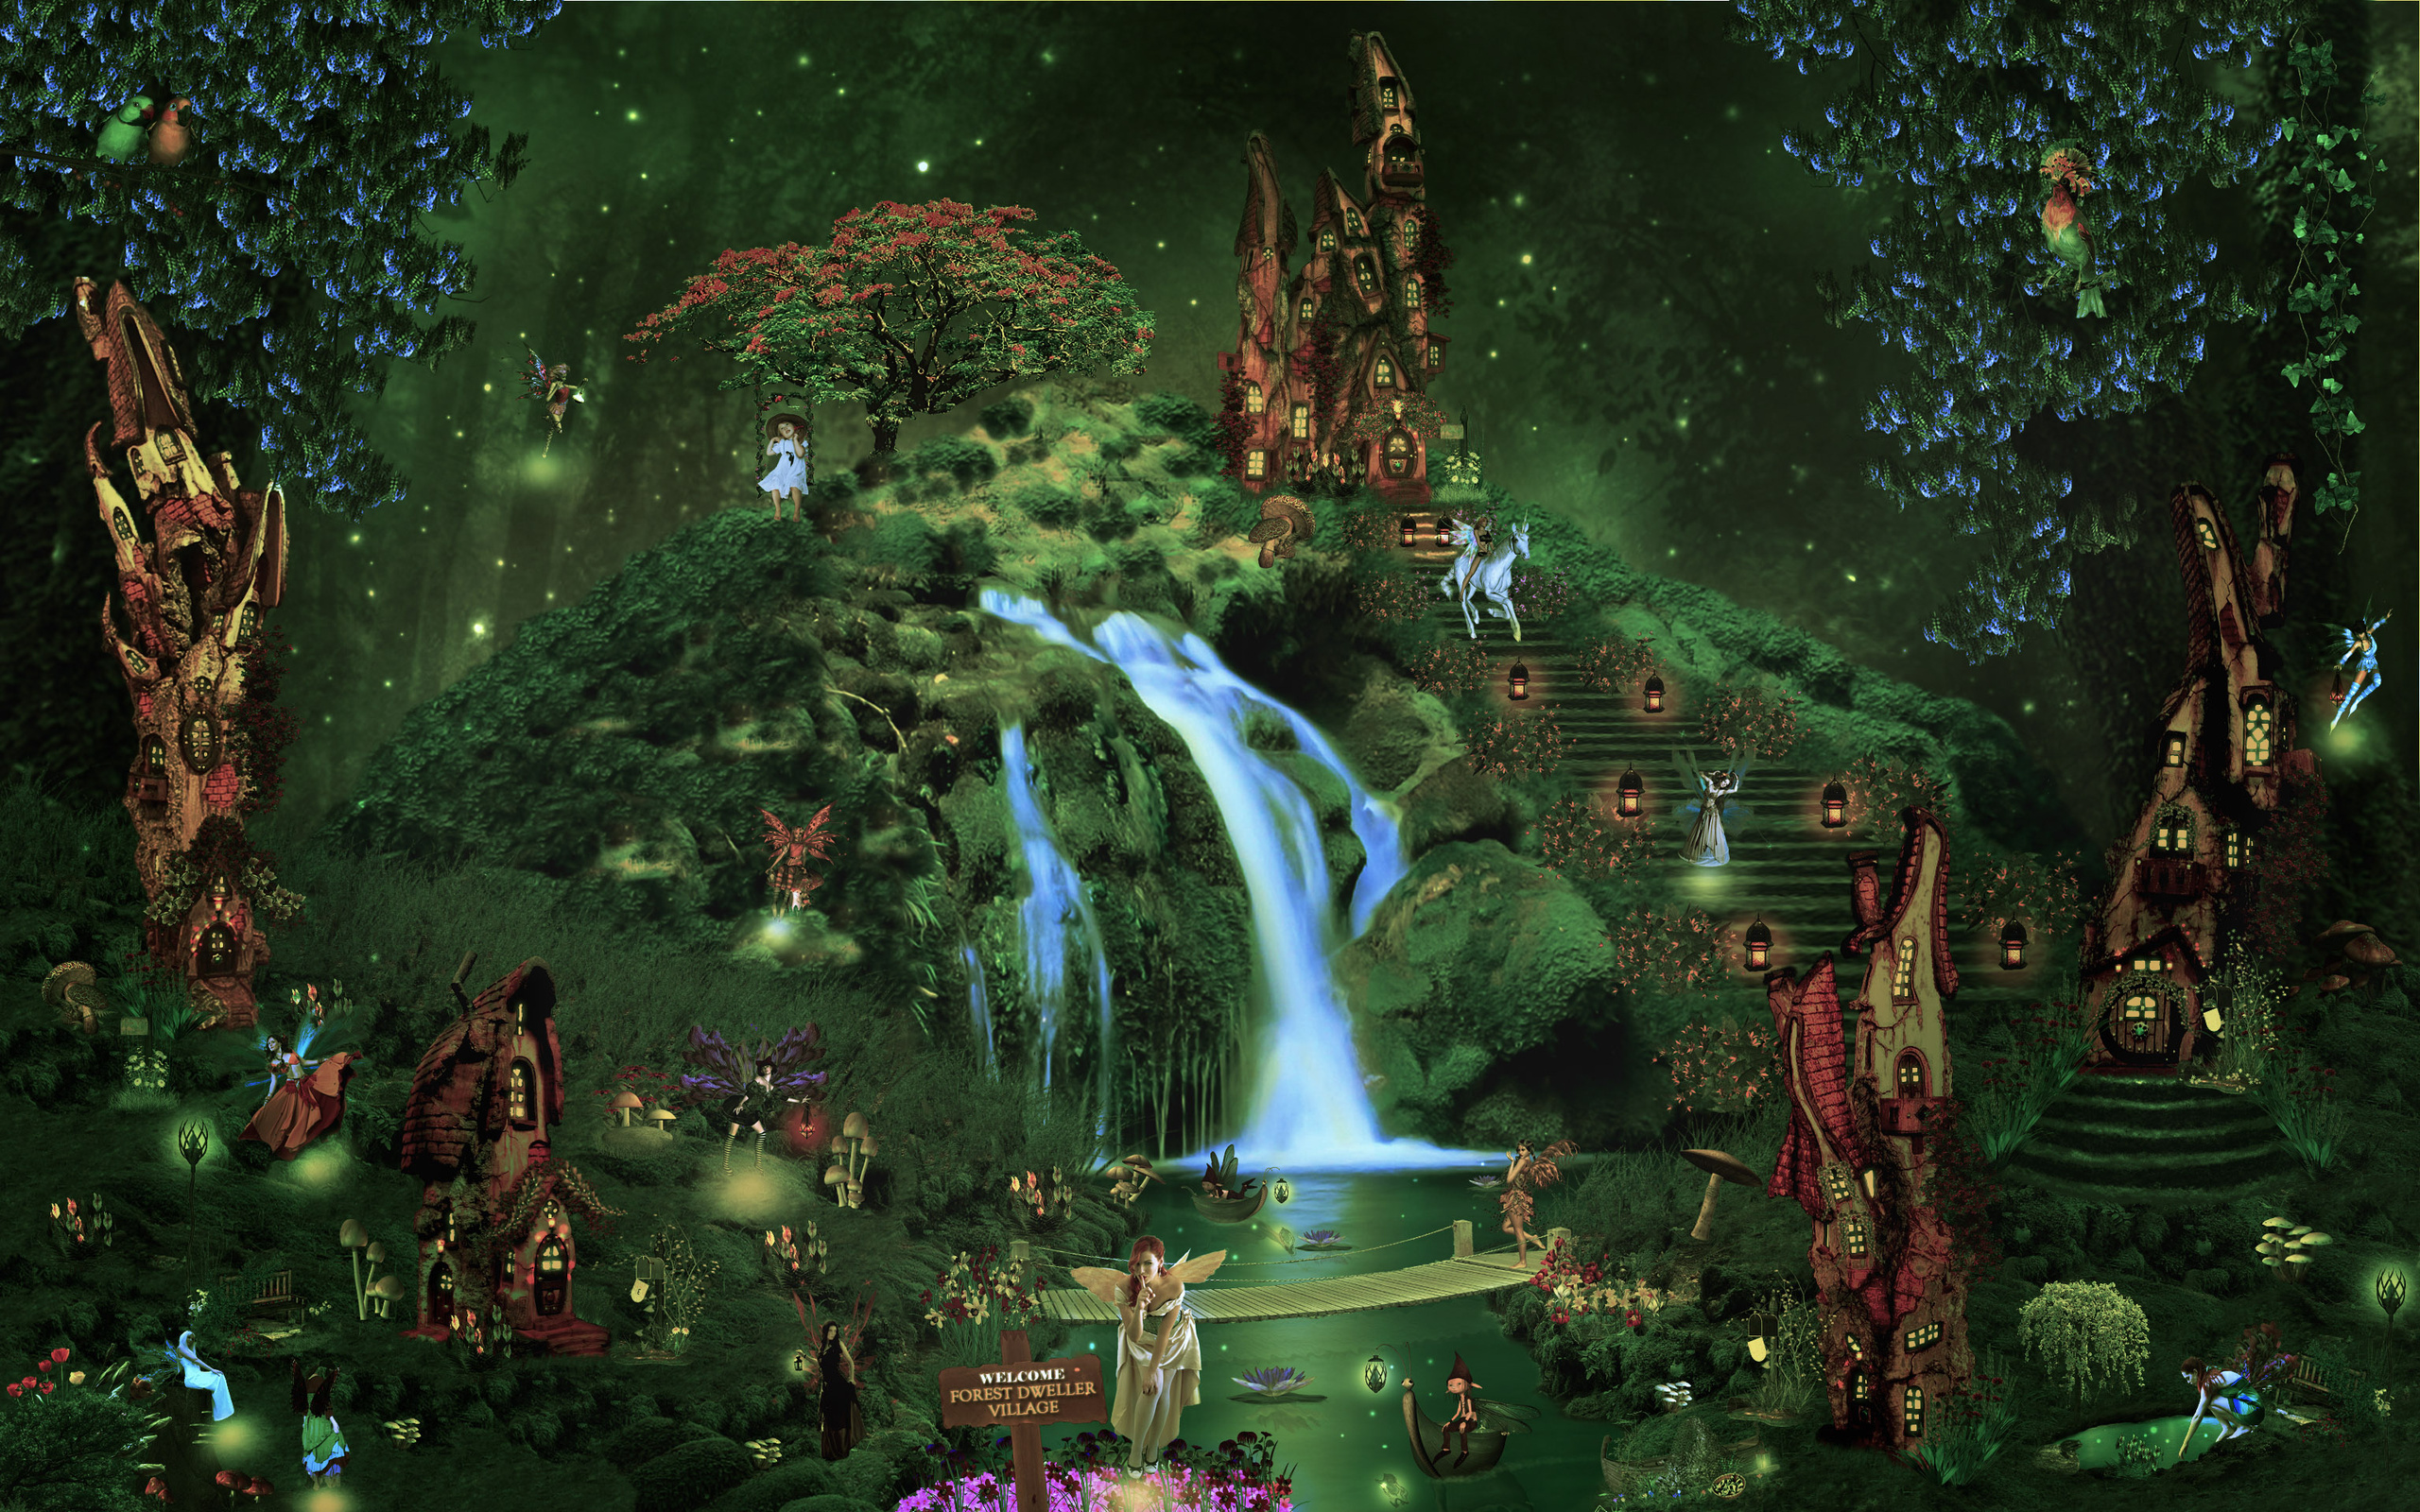 Castle City Forest Waterfall Fairy Elf Magical Wallpaper Background